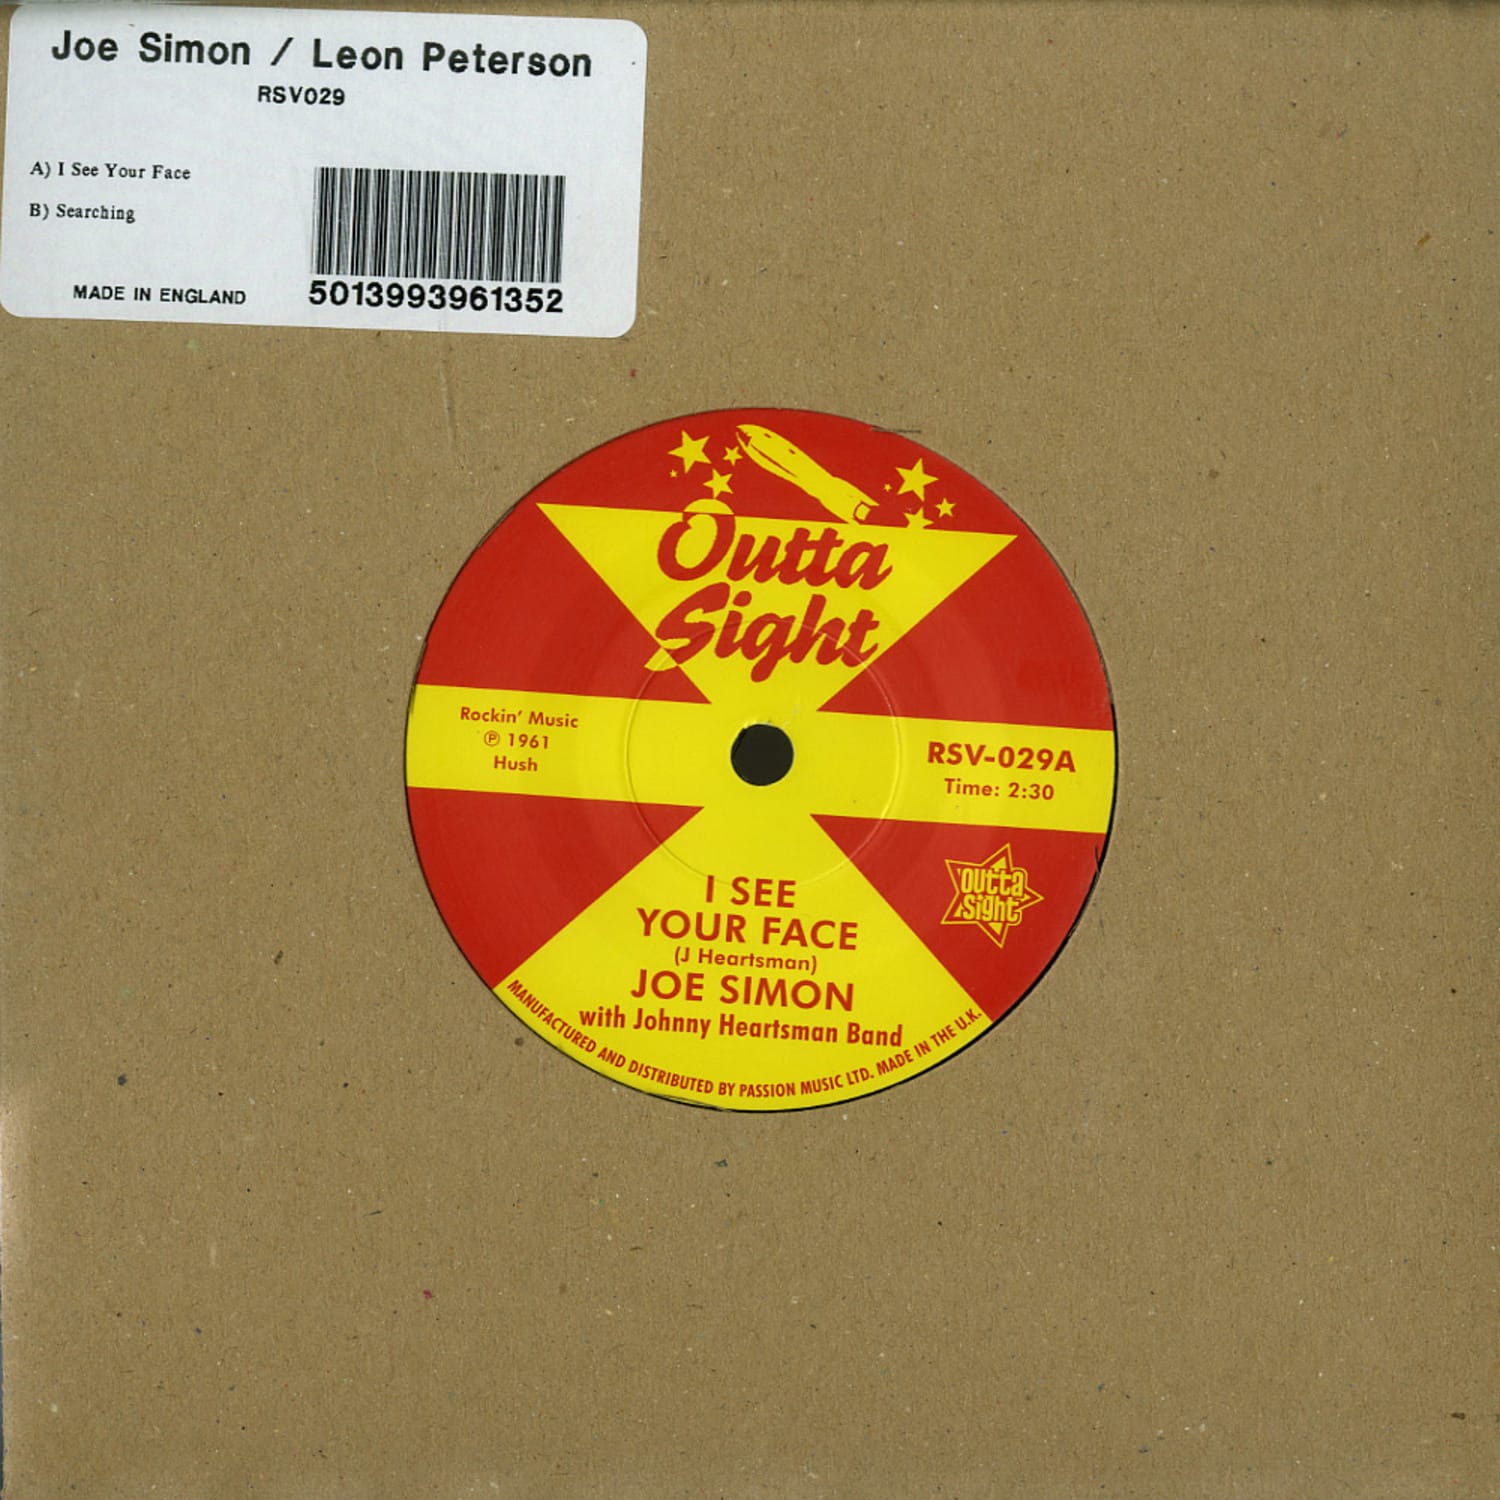 Joe Simon / Leon Peterson - I SEE YOUR FACE / SEARCHING 